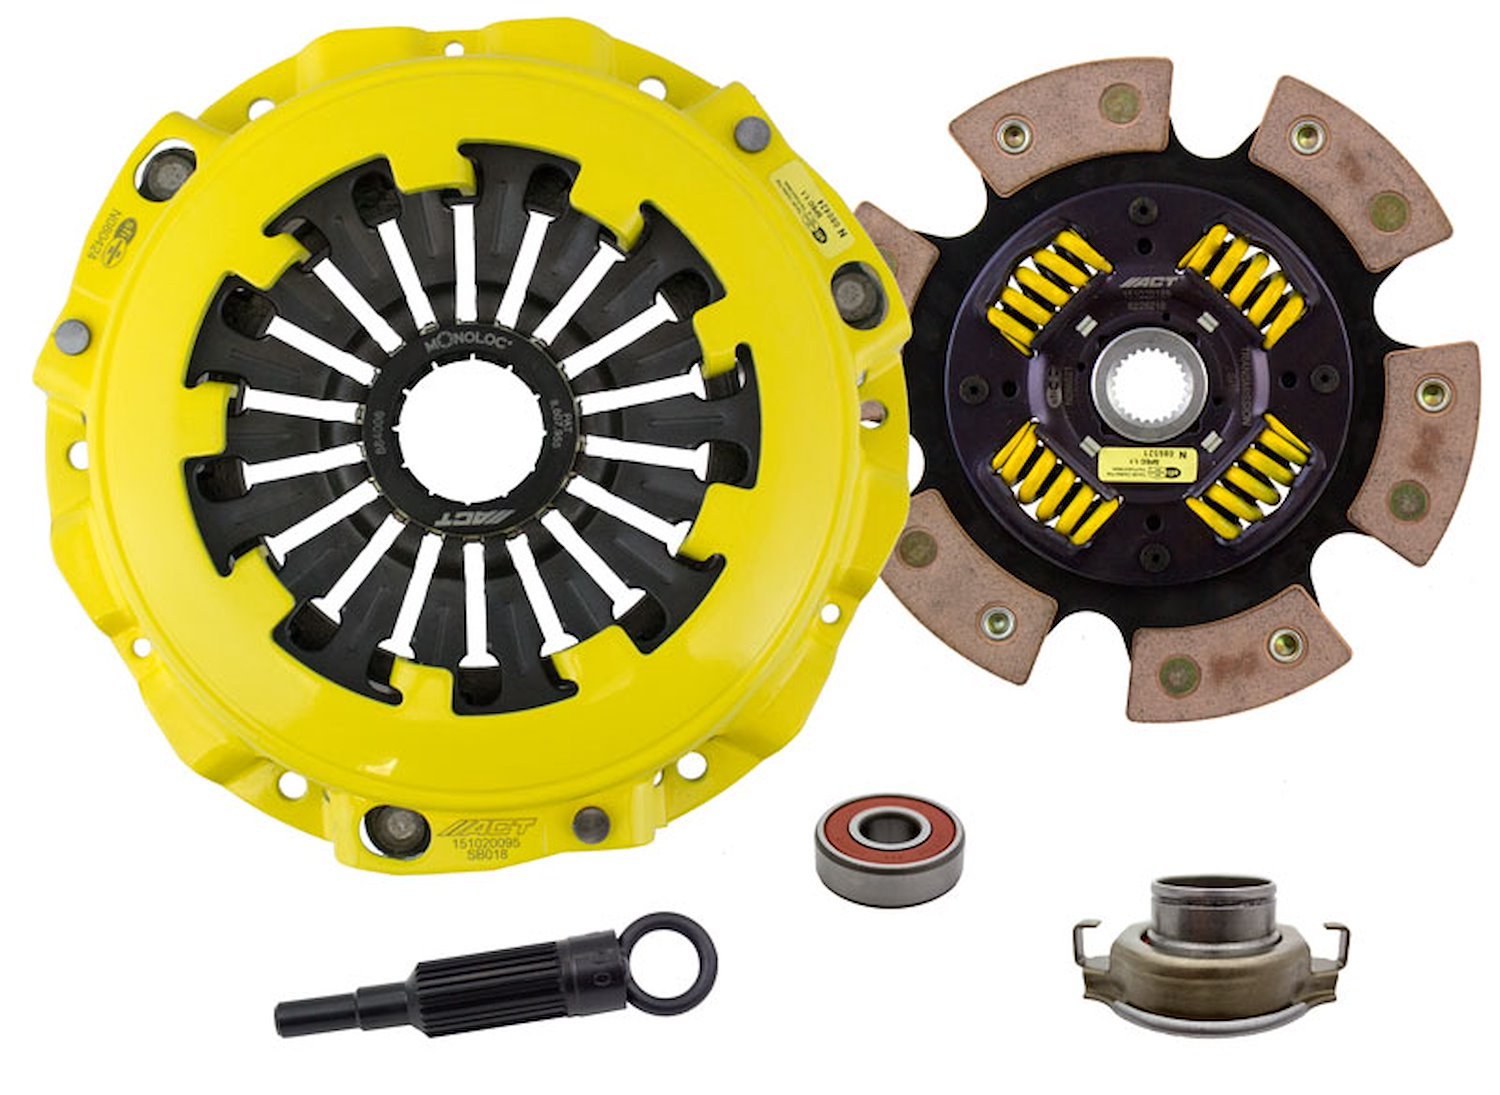 HD-M/Race Sprung 6-Pad Transmission Clutch Kit Fits Select Multiple Makes/Models